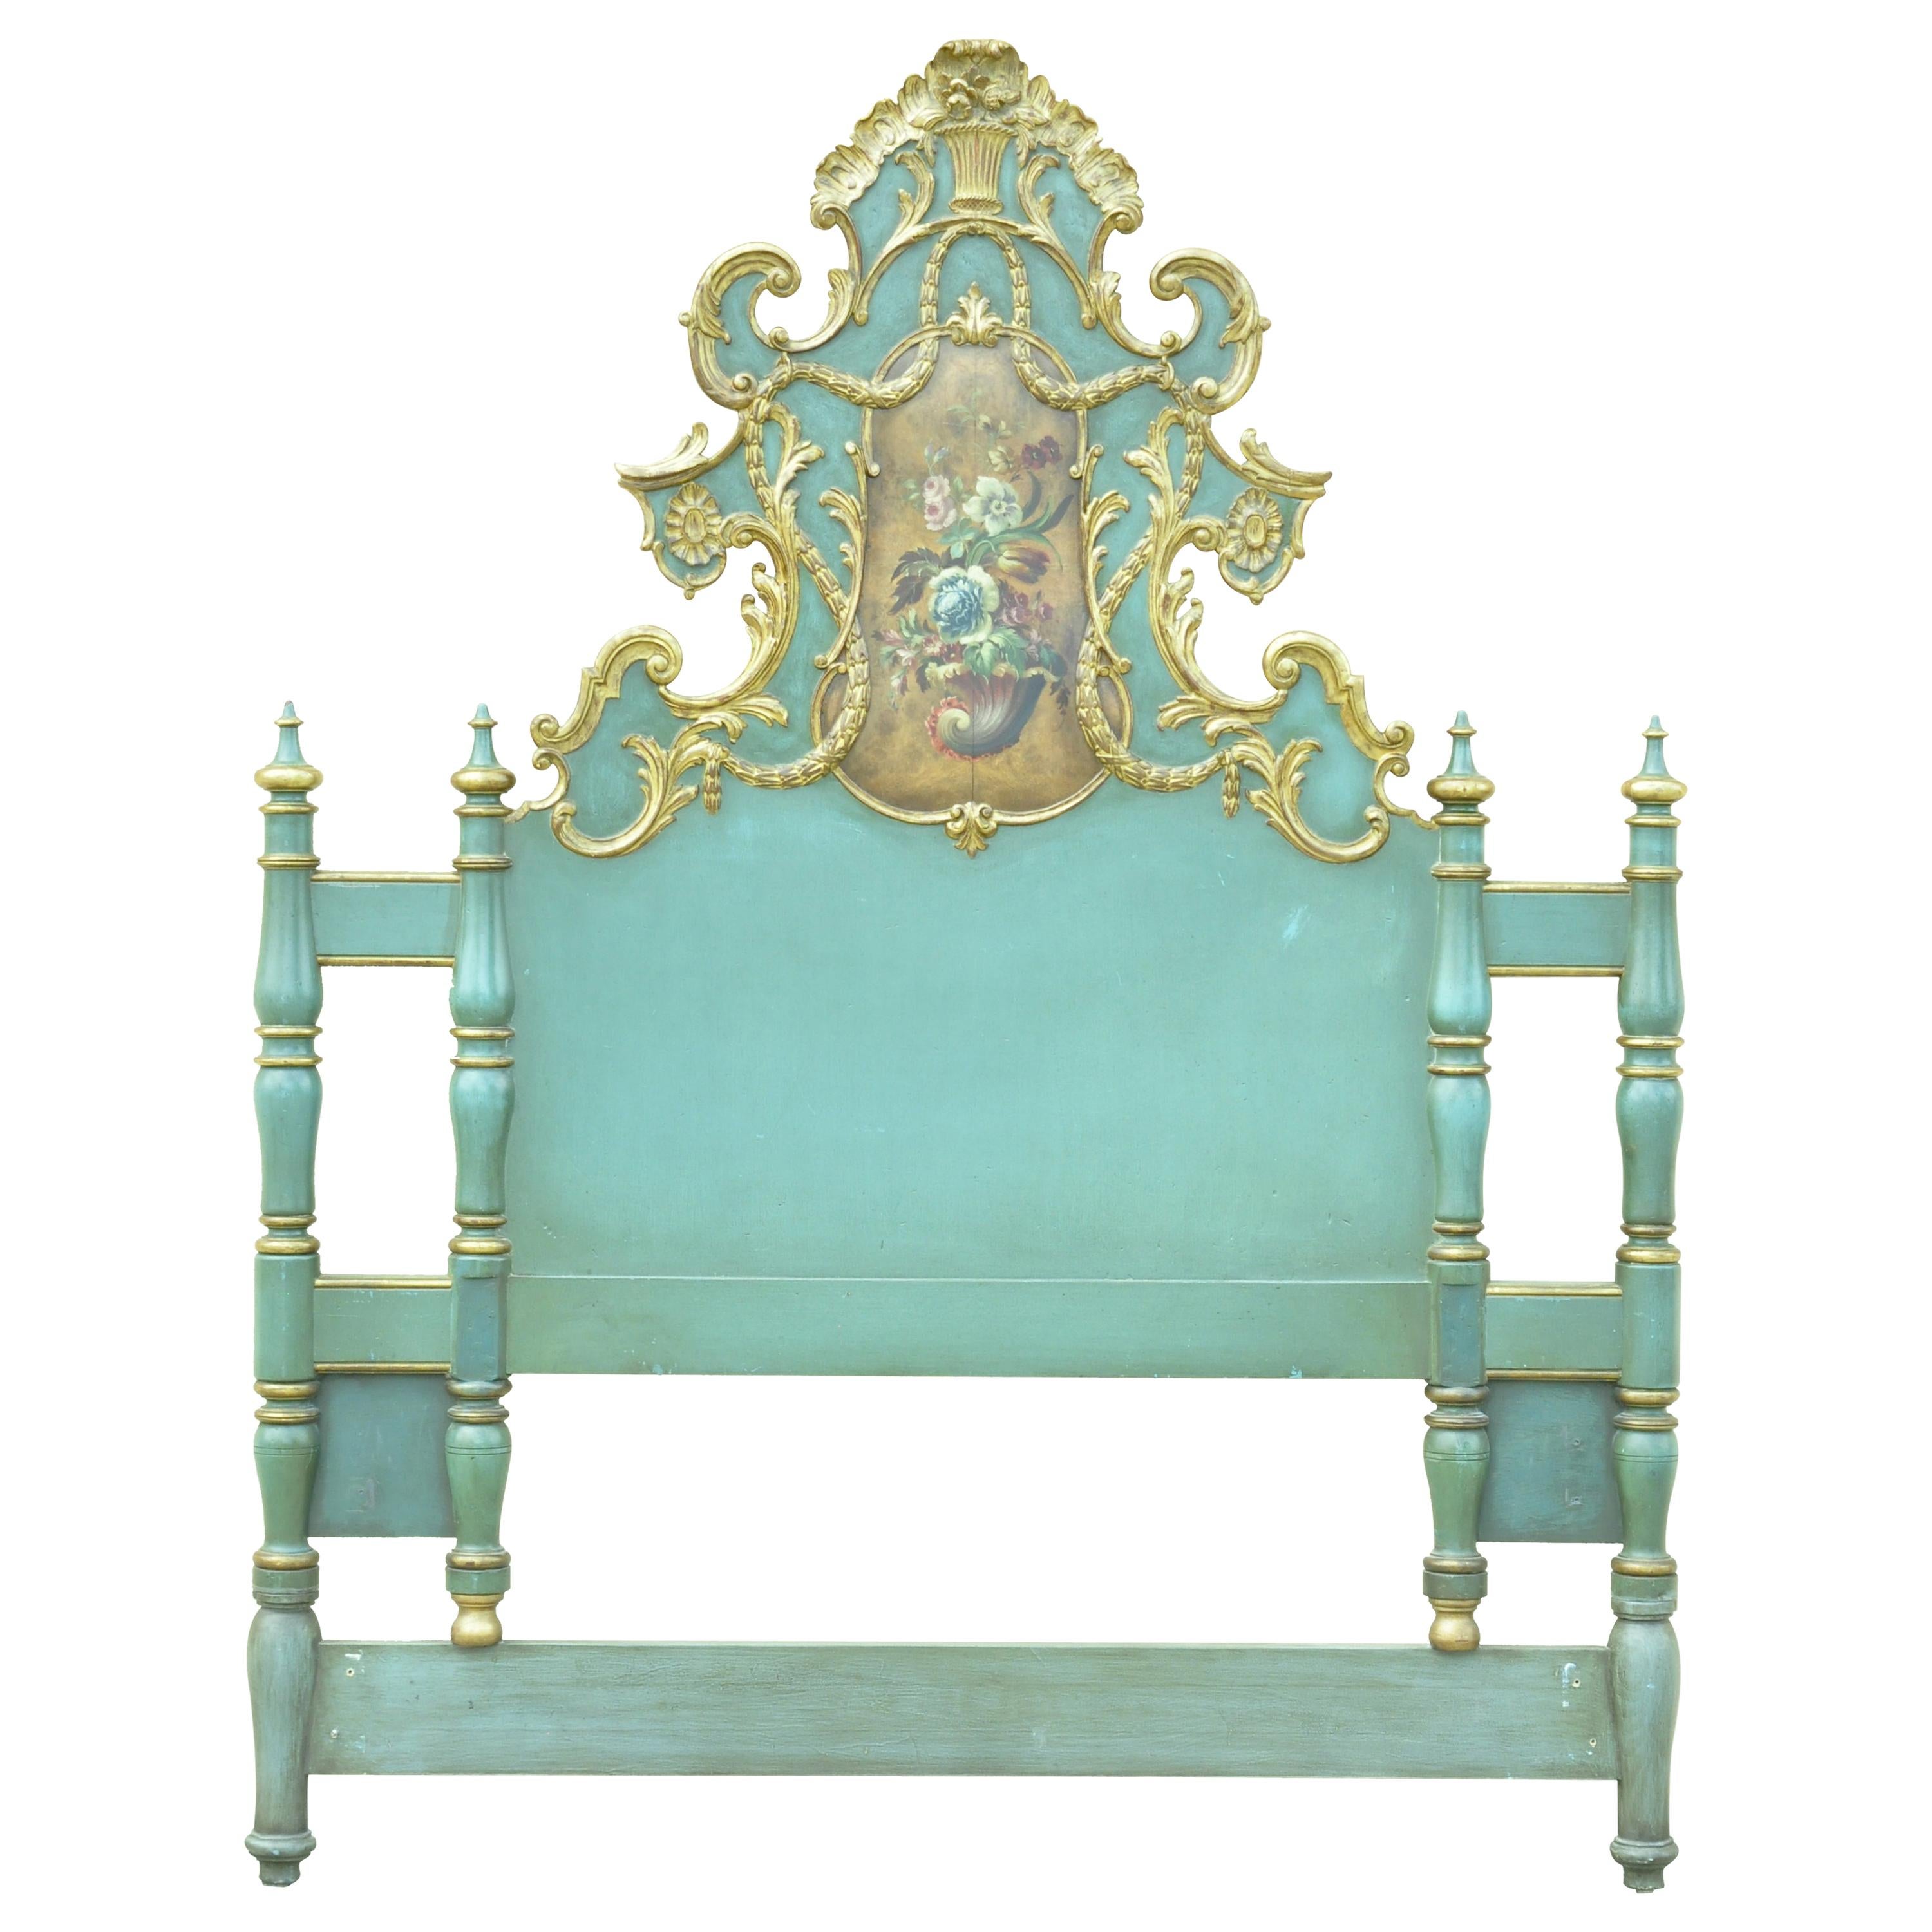 Italian Rococo Green Gold Gilt Wood Hand Painted Floral Full Queen Bed Headboard